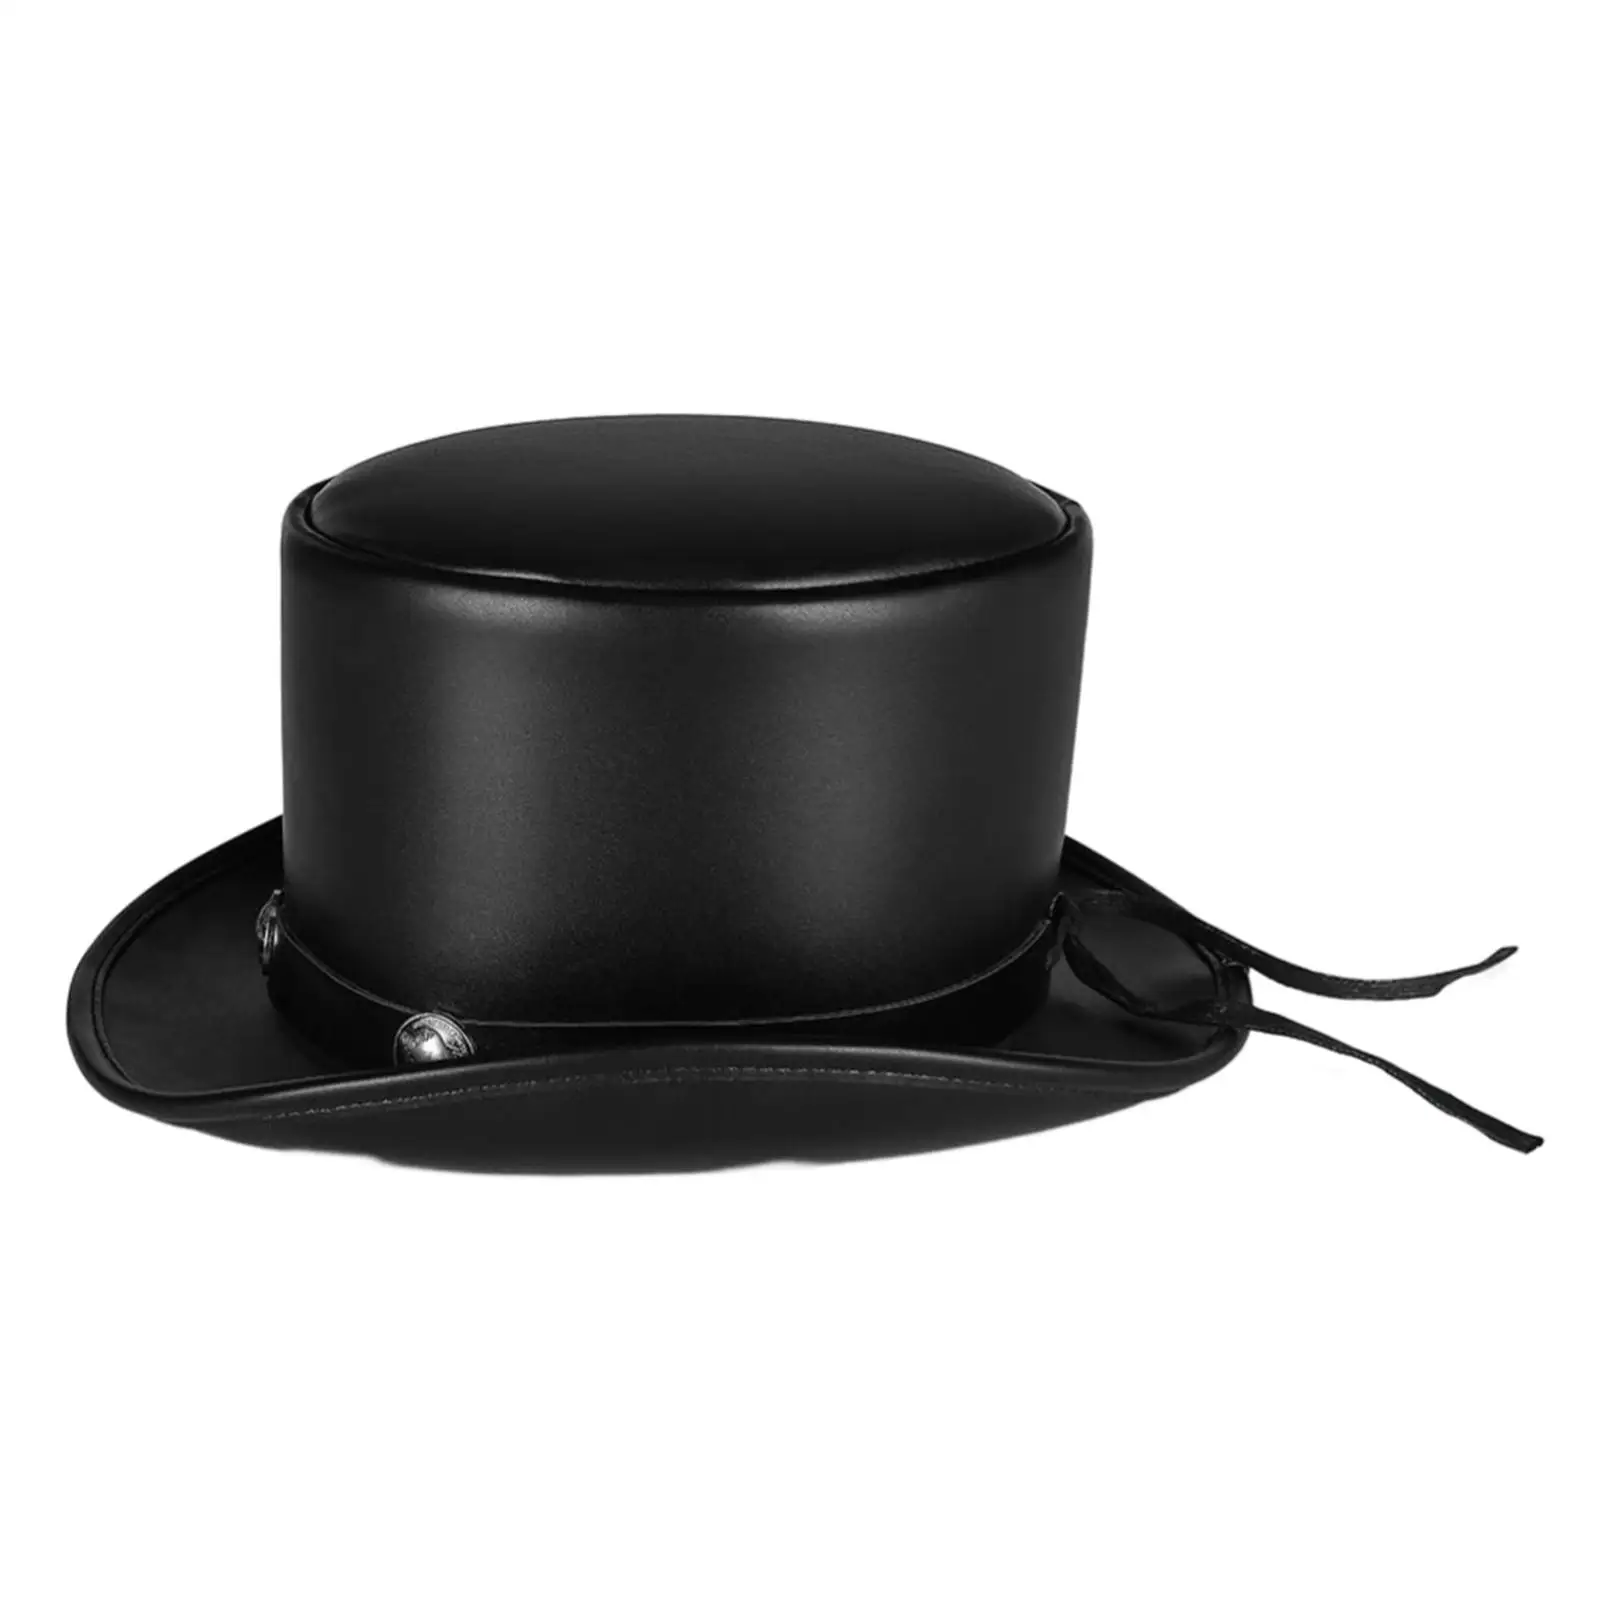 Unisex Magician Top Hat One Size Fits Most Adults Stovepipe Victorian Leather Headwear with Rivet for Men Showman Costume Circus